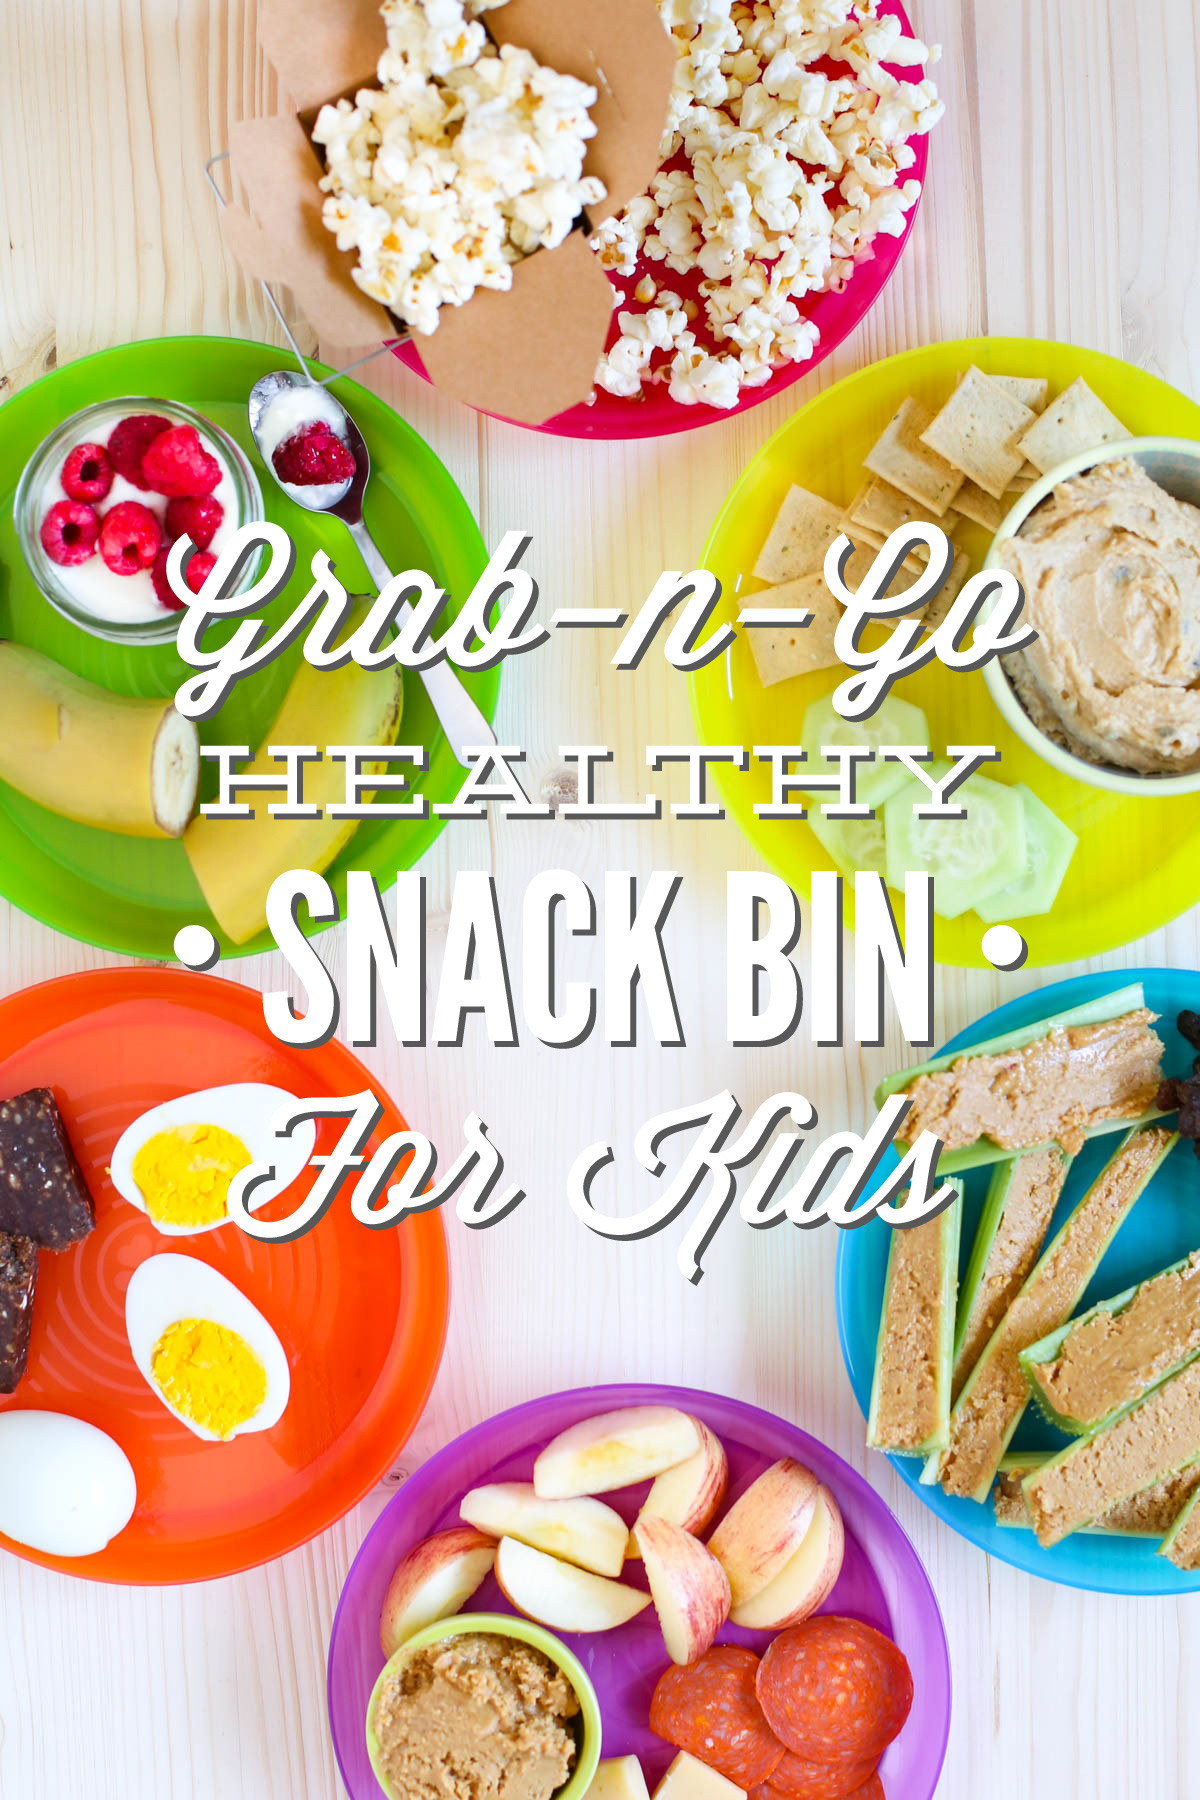 Healthy Snacks For Kids On The Go
 Simplify Snack Time Grab n Go Healthy Snack Bin for Kids